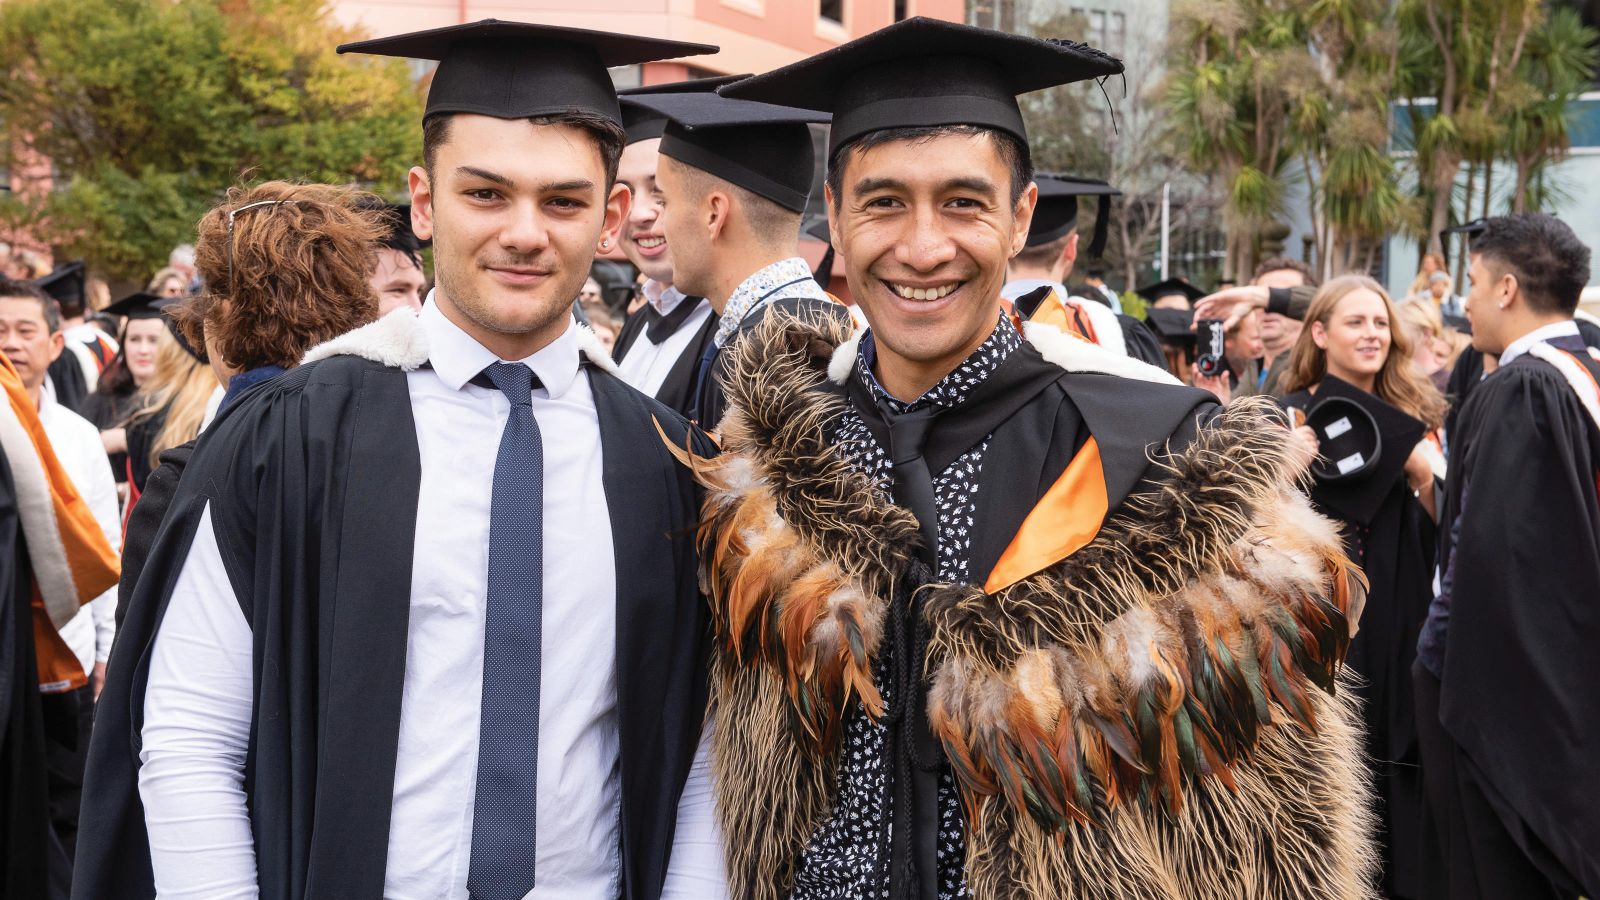 Two Māori men in graduation gowns, one also wearing a feather cloak, with more graduates in the background.